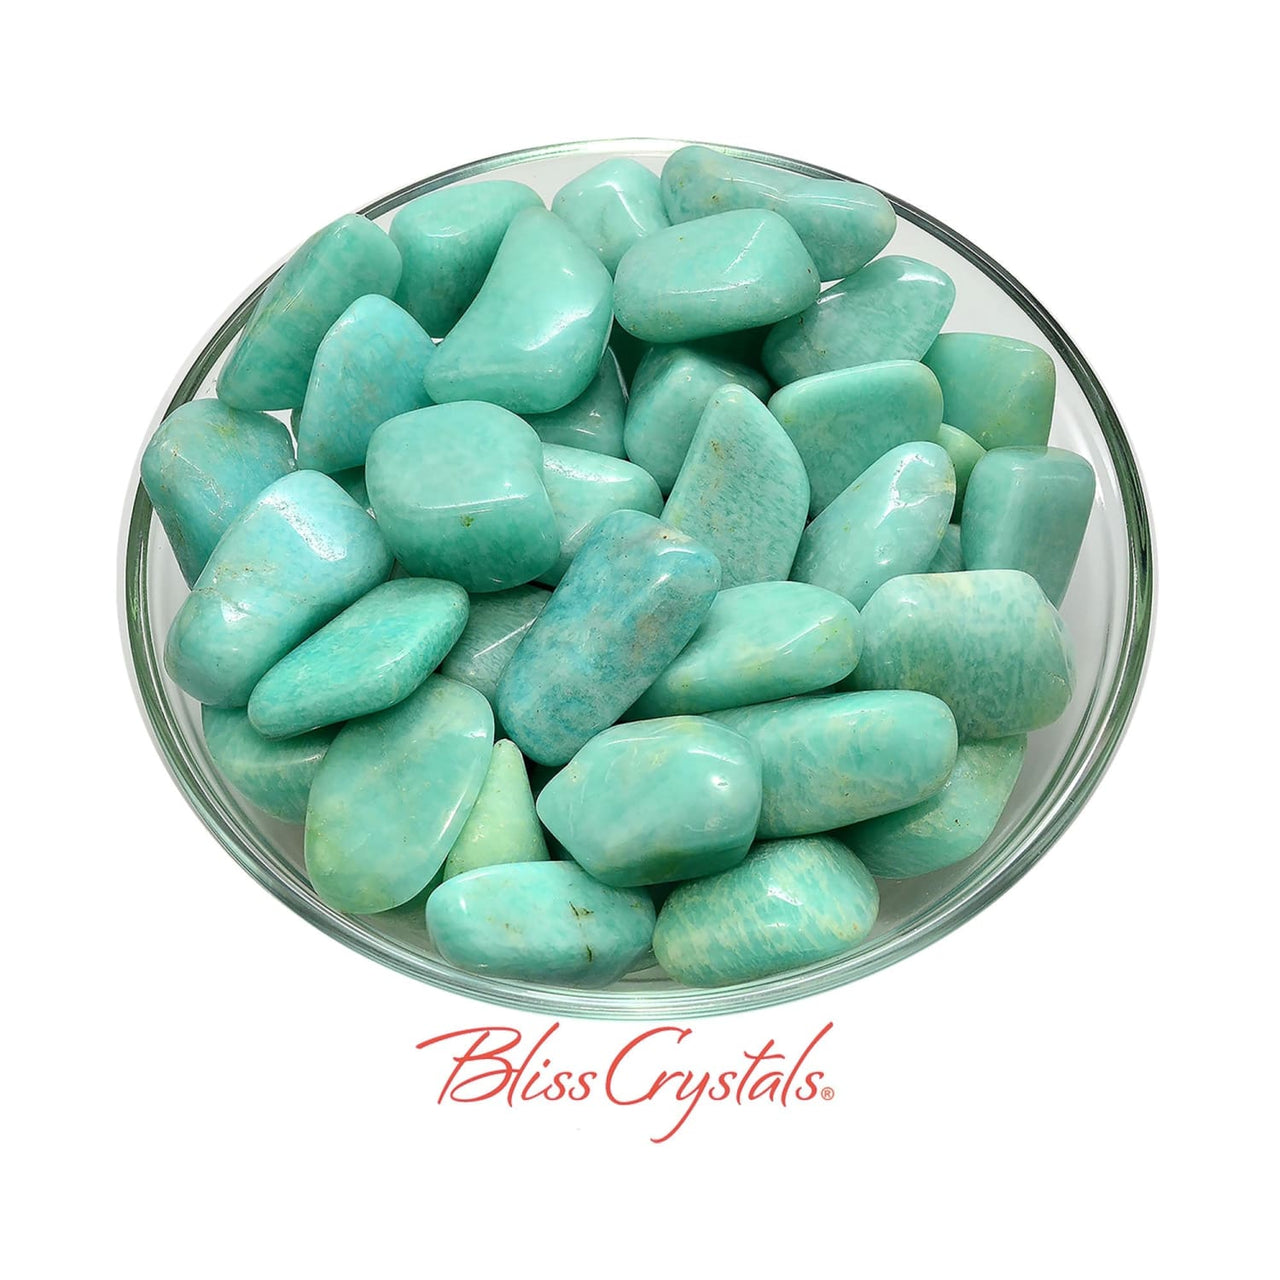 1 Teal AMAZONITE Tumbled Stone Green Healing Crystal and 